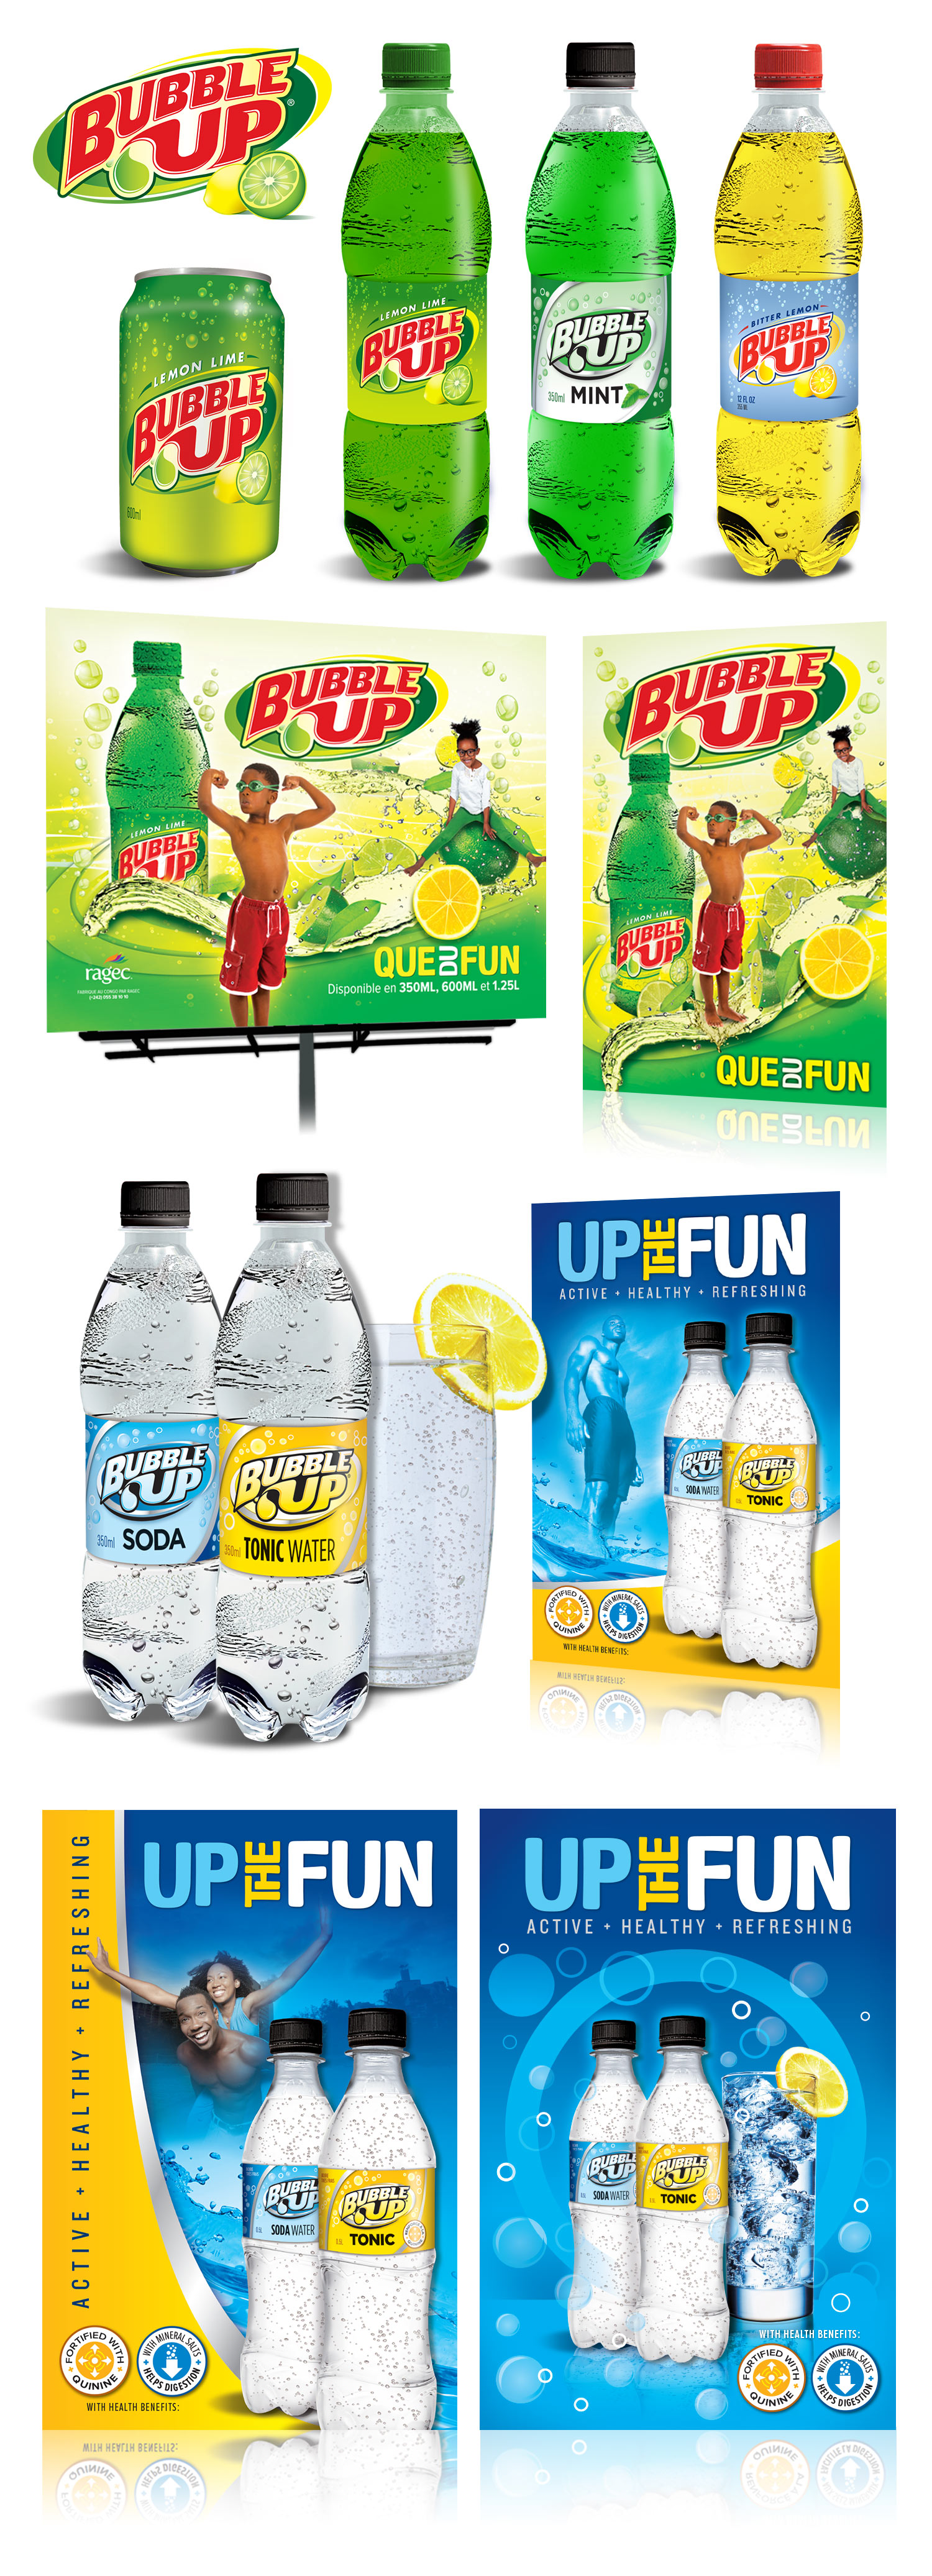 Bubble Up Packaging Design and Promotion